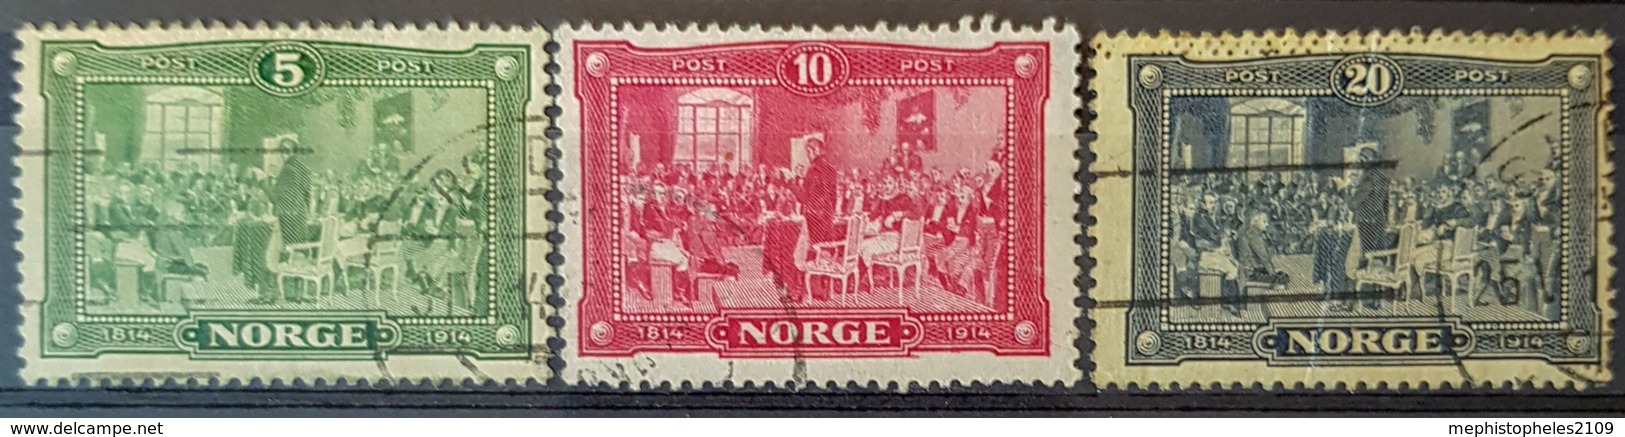 NORWAY 1914 - Canceled - Sc# 96, 97, 98 - Used Stamps